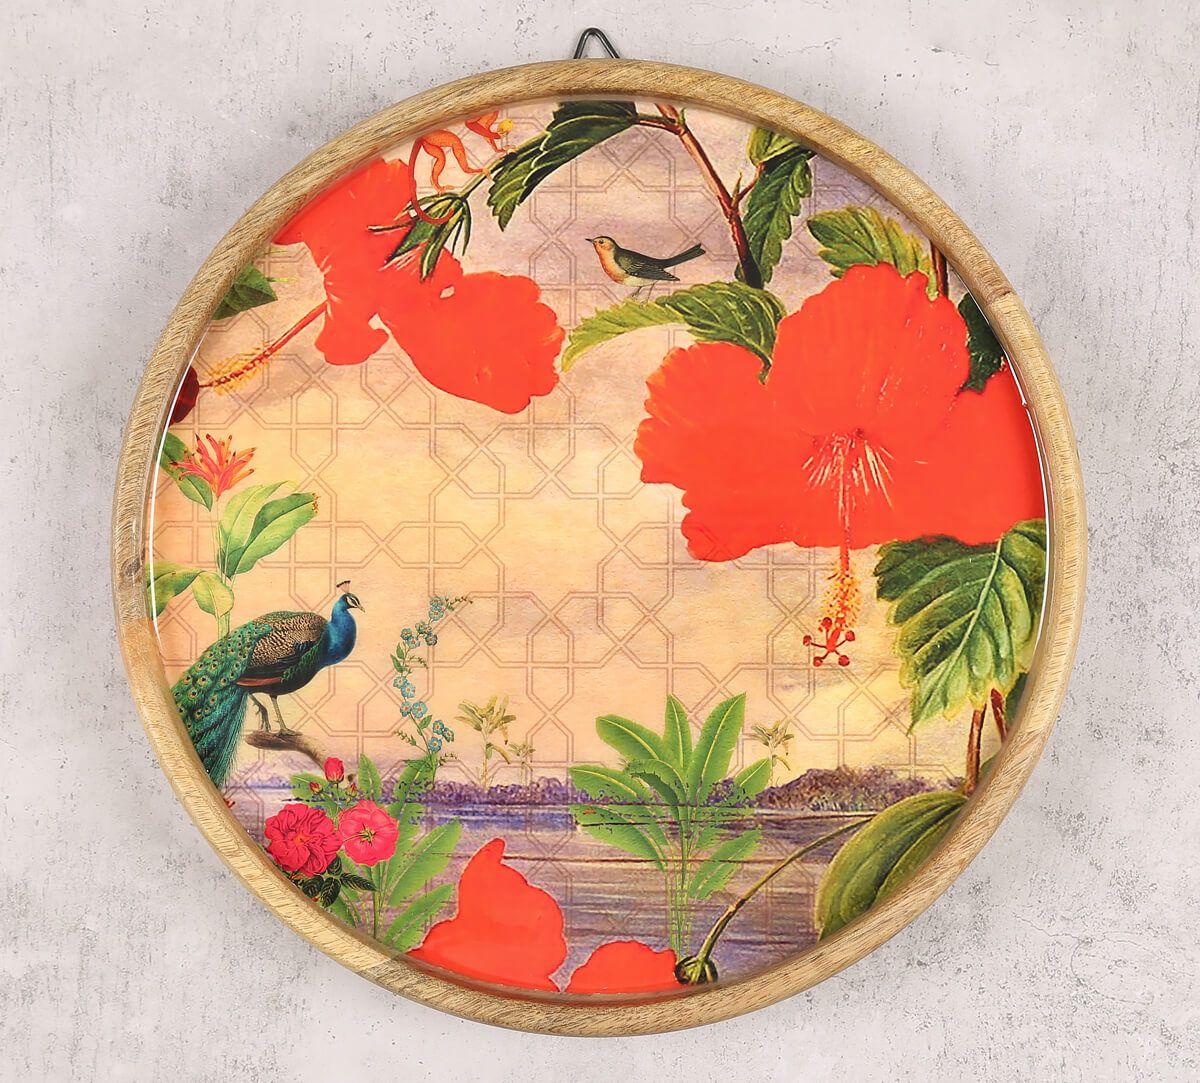 India Circus Entrancing Forestry Decor Plate